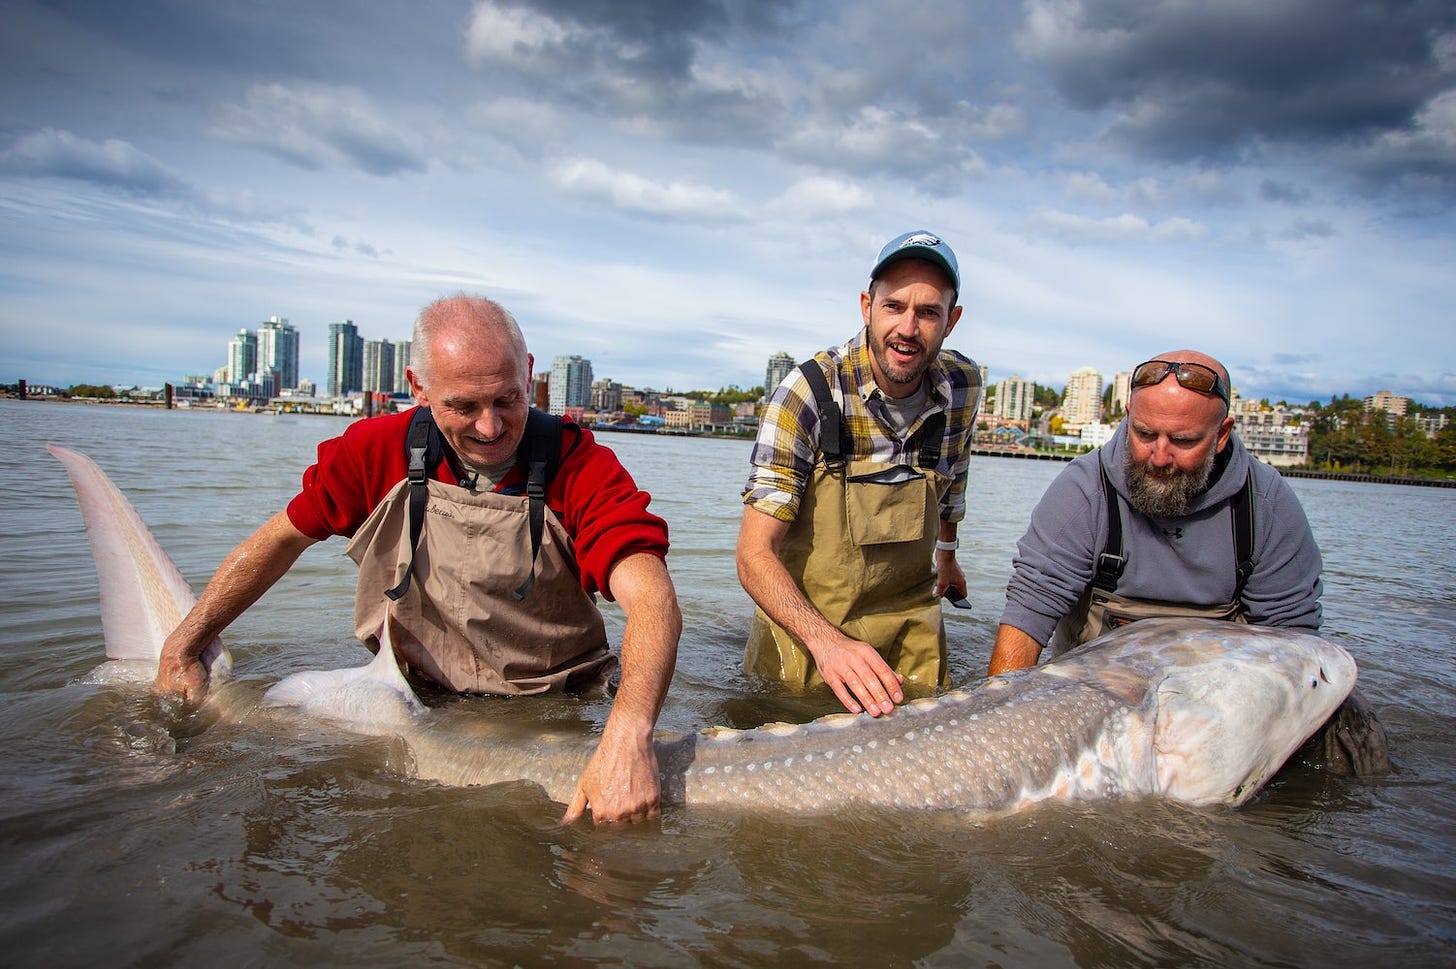 Three men waist deep in water struggle to hold a very large sturgeon. The Vancouver skyline is visible behind them.